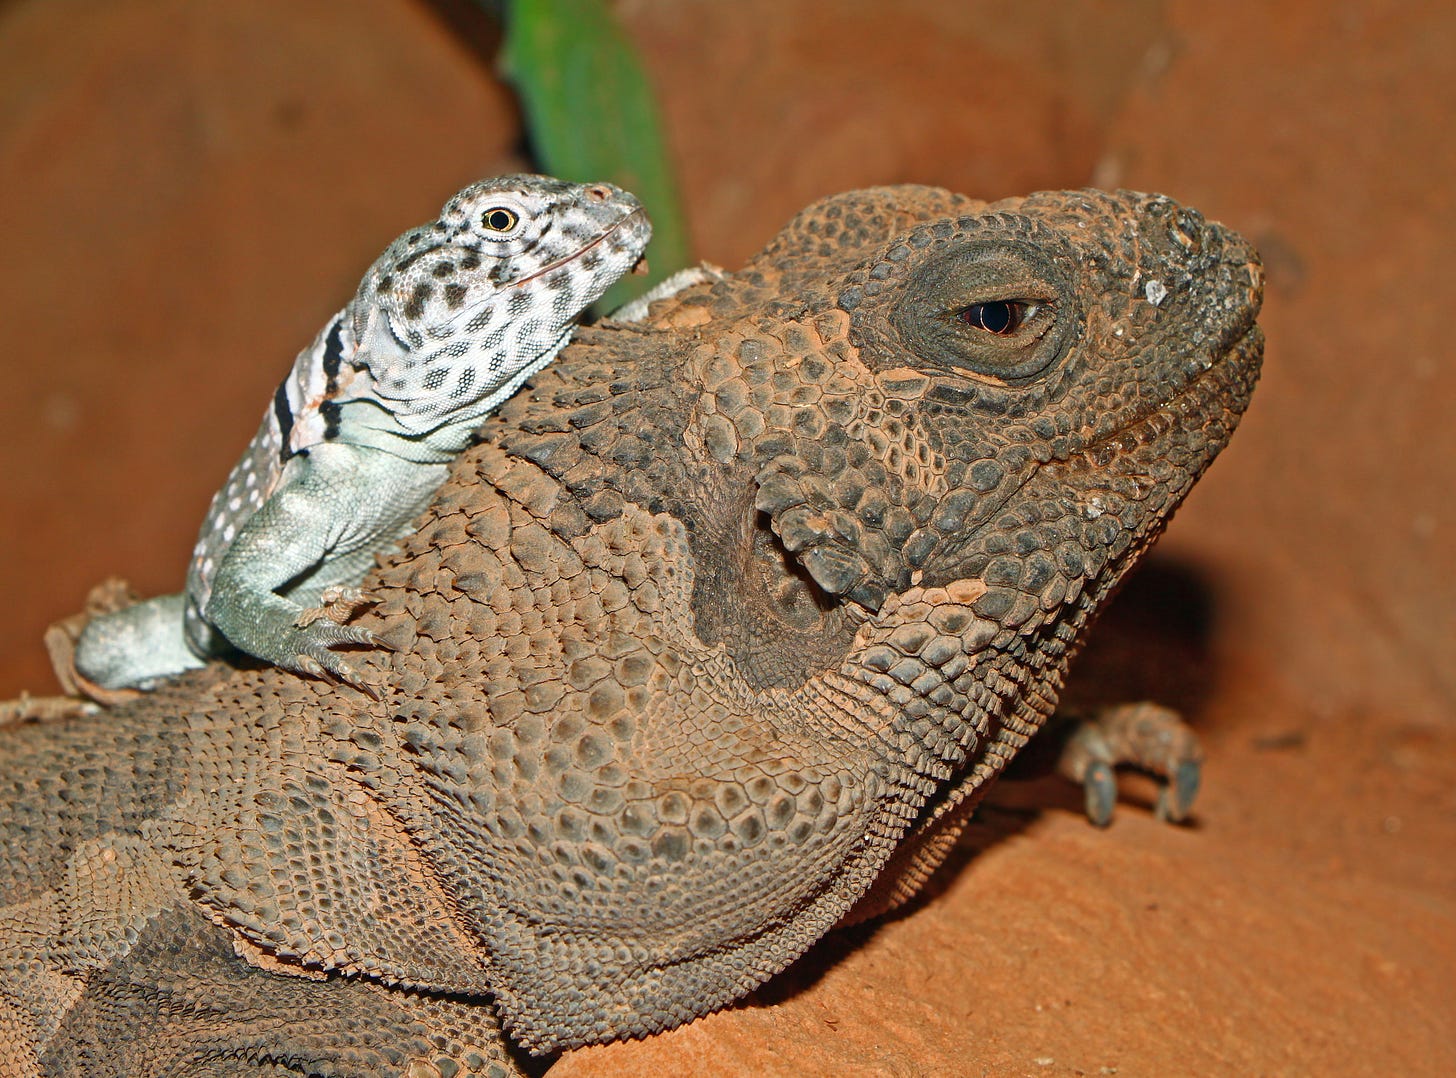 A small white and grey lizard sits on top of an Angel Island chuckwalla